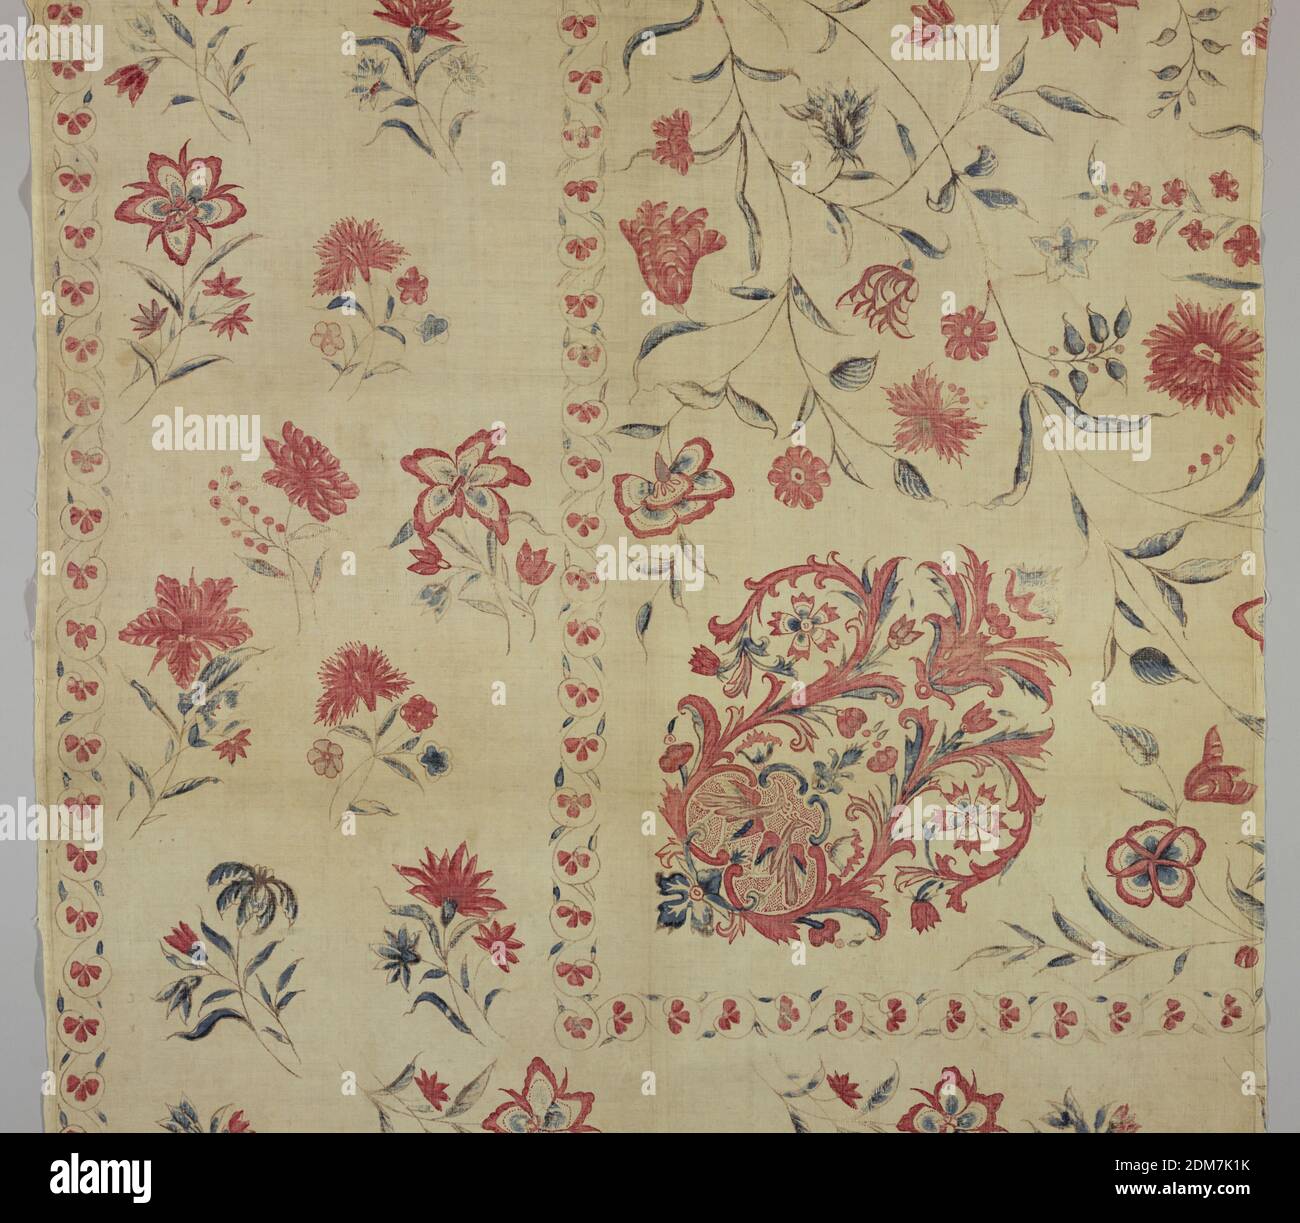 Cover, Medium: cotton Technique: mordant and resist painted and immersion dyed on plain weave (chintz), Wide border on two sides with a shaped medallion in the inner corner. Polychrome on white., On a white field, in detached arrangement, freely drawn flower sprays in shades of red on delicate brown stems, with foliage now blue. A corner ornament of symmetrically curving leaf scrolls in red and blue forms a medallion, in which at its base a small section formed of C-scrolls in blue, frames confronted birds on dotted red ground. Birds' wings over-painted in small blue dabs. Narrow guard border Stock Photo